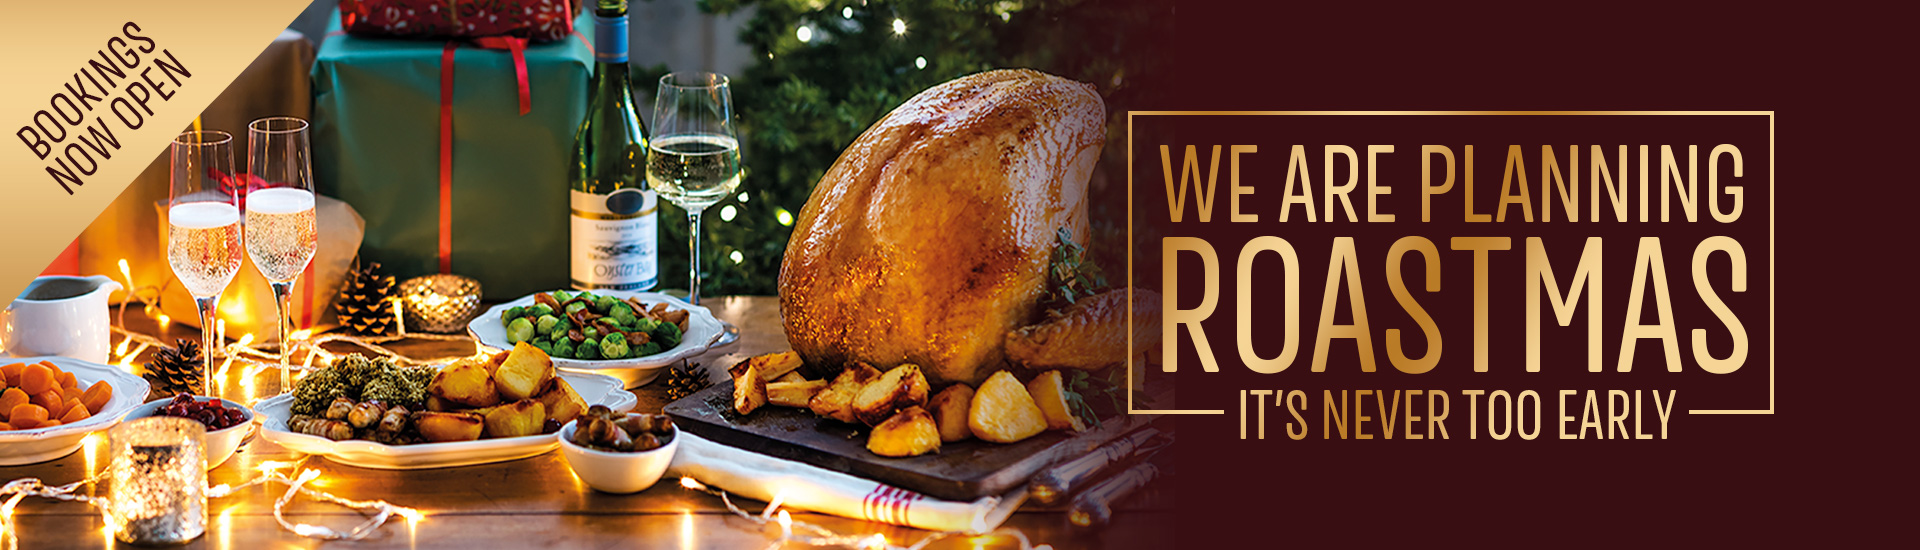 Christmas 2022 at your local Toby Carvery Loughborough | Home of the Roast